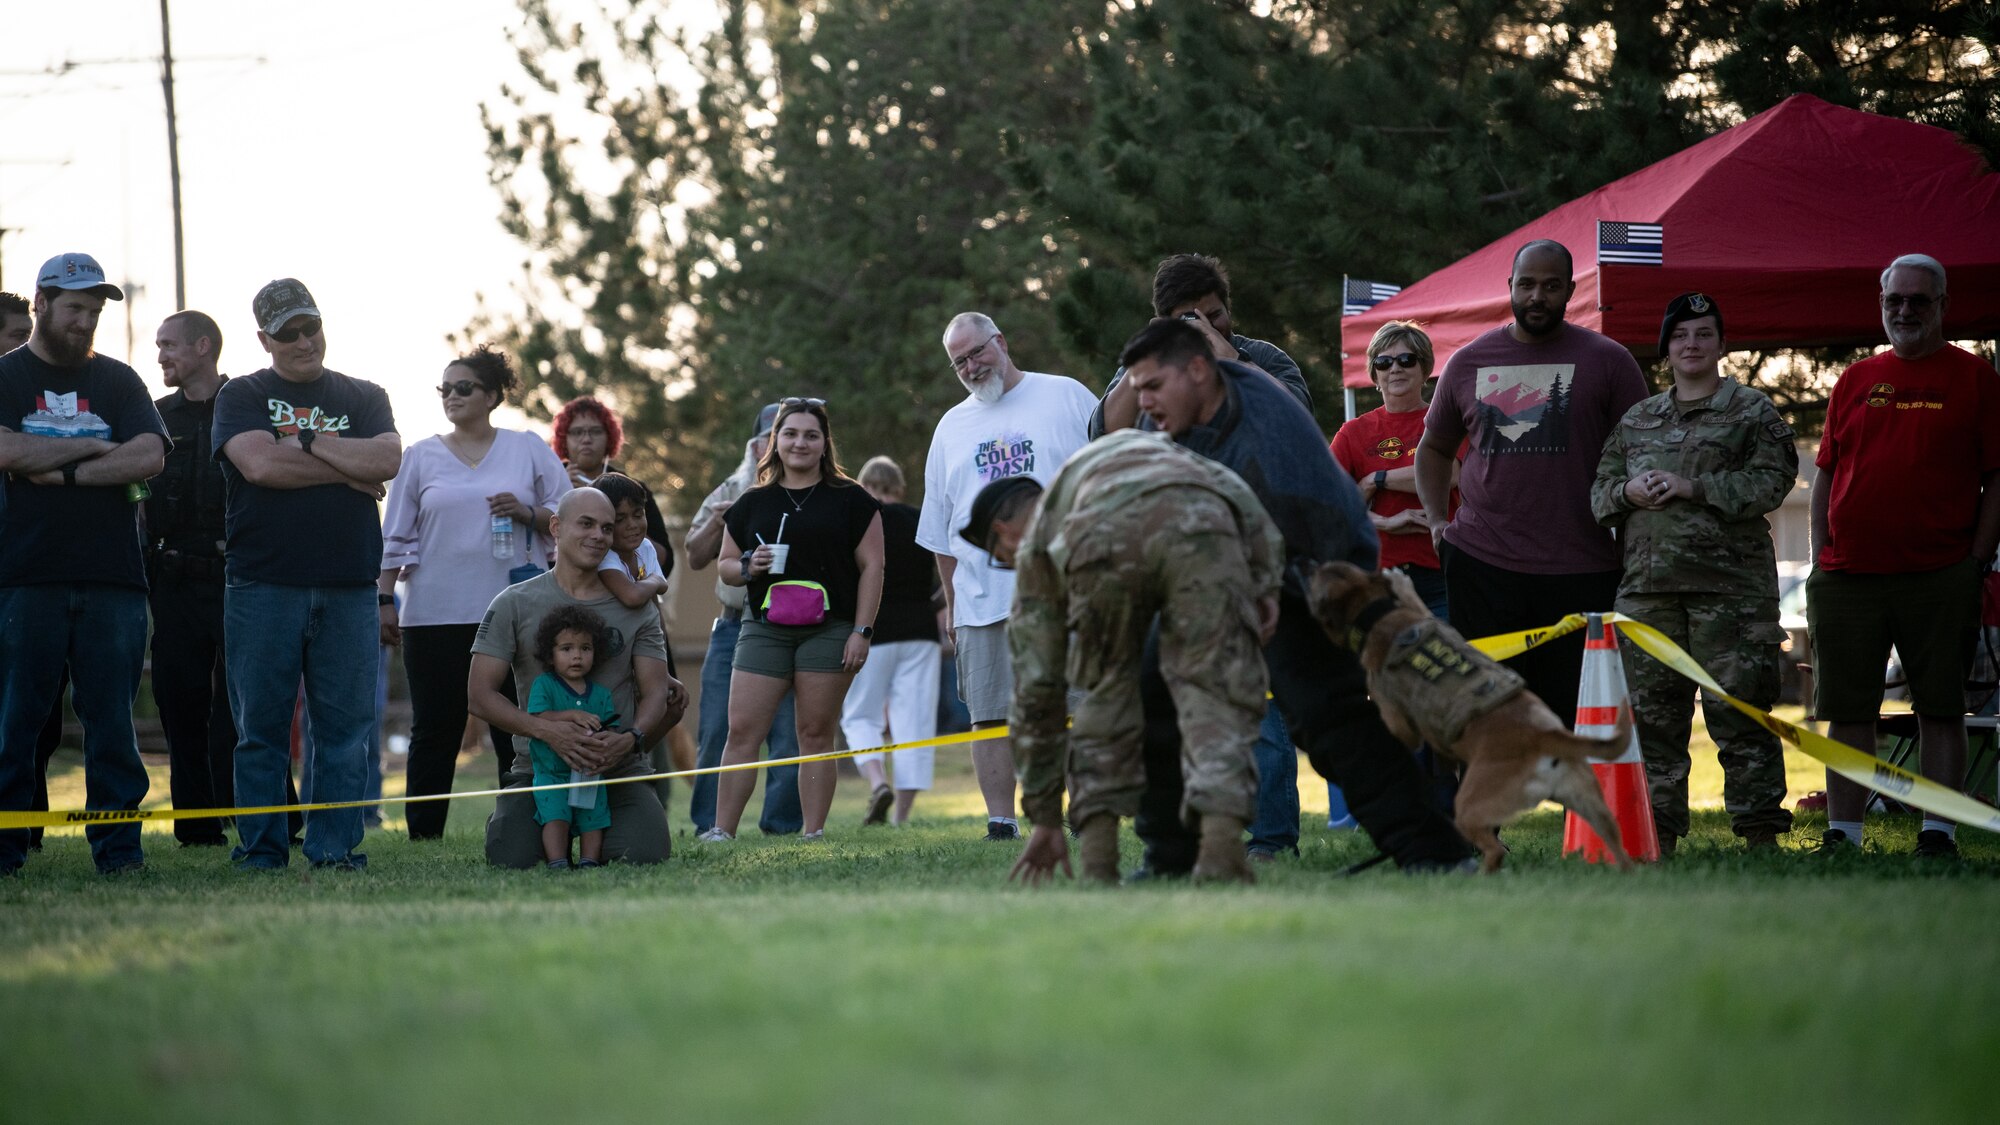 Clovis and Cannon Air Force Base families observe a military working dog demonstration during National Night Out Aug. 2, 2022, at Green Acres Park, Clovis, New Mexico. Cannon Air Commandos from the 27th SOSFS and various New Mexico law enforcement and first responders took part in the event, which is part of a nation-wide campaign to strengthen community safety and enhance relationships between residents and law enforcement. (U.S. Air Force photo by Staff Sgt. Peter Reft)